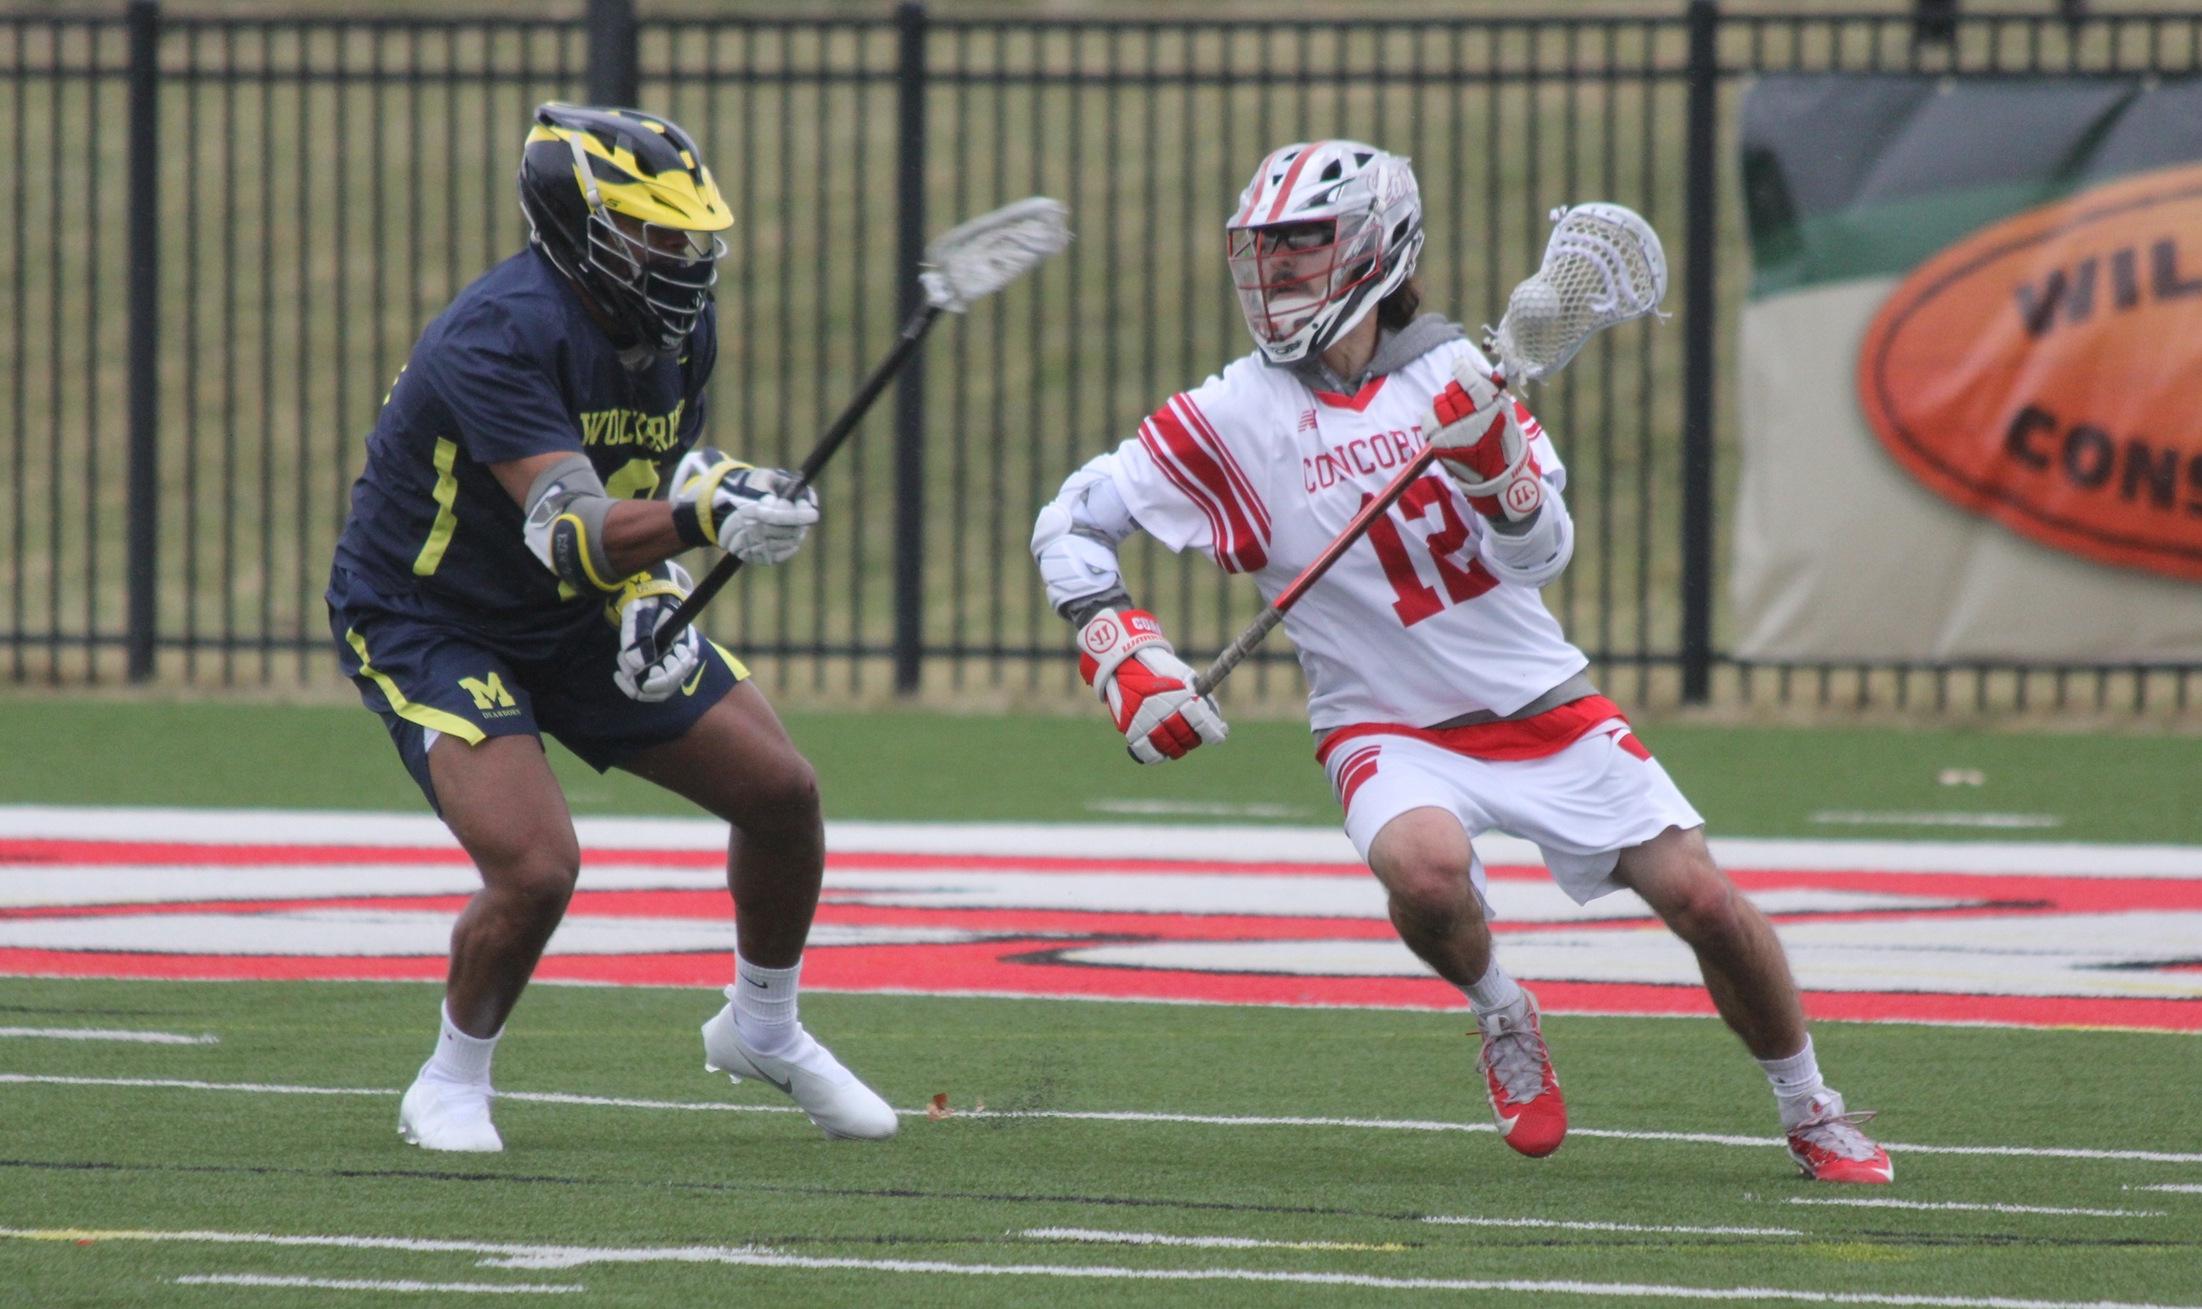 Blake Blaisdell recorded 3 goals in the Cardinals 14-8 win over UM Dearborn (Photo Courtesy all lacrosse michigan)